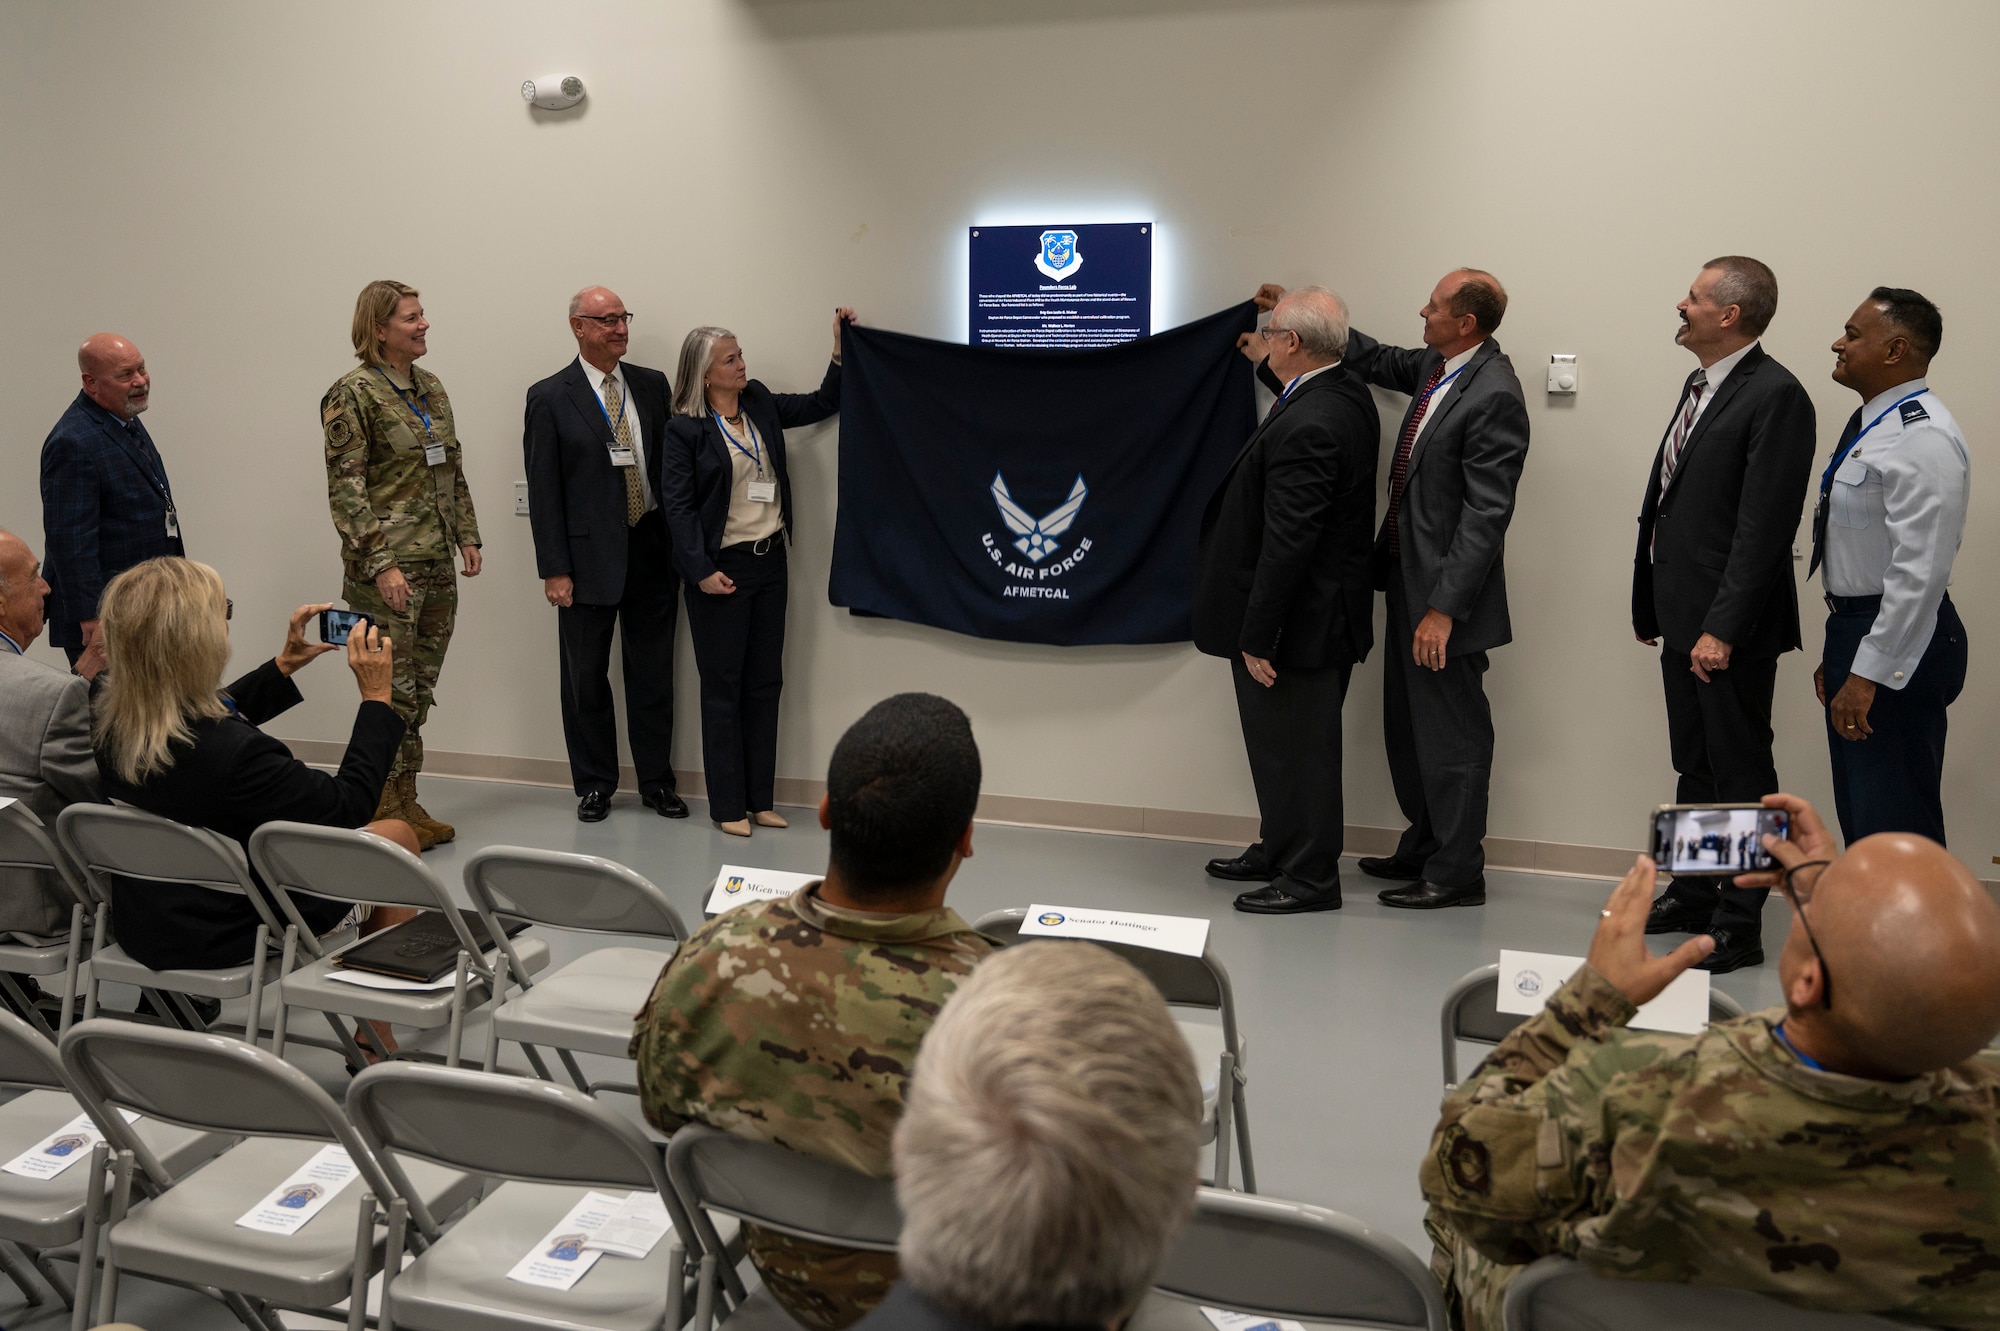 Guests of honor unveil a placard at a commemoration ceremony at the Air Force Primary Standards Lab at Heath, Ohio Sept. 12, 2022.